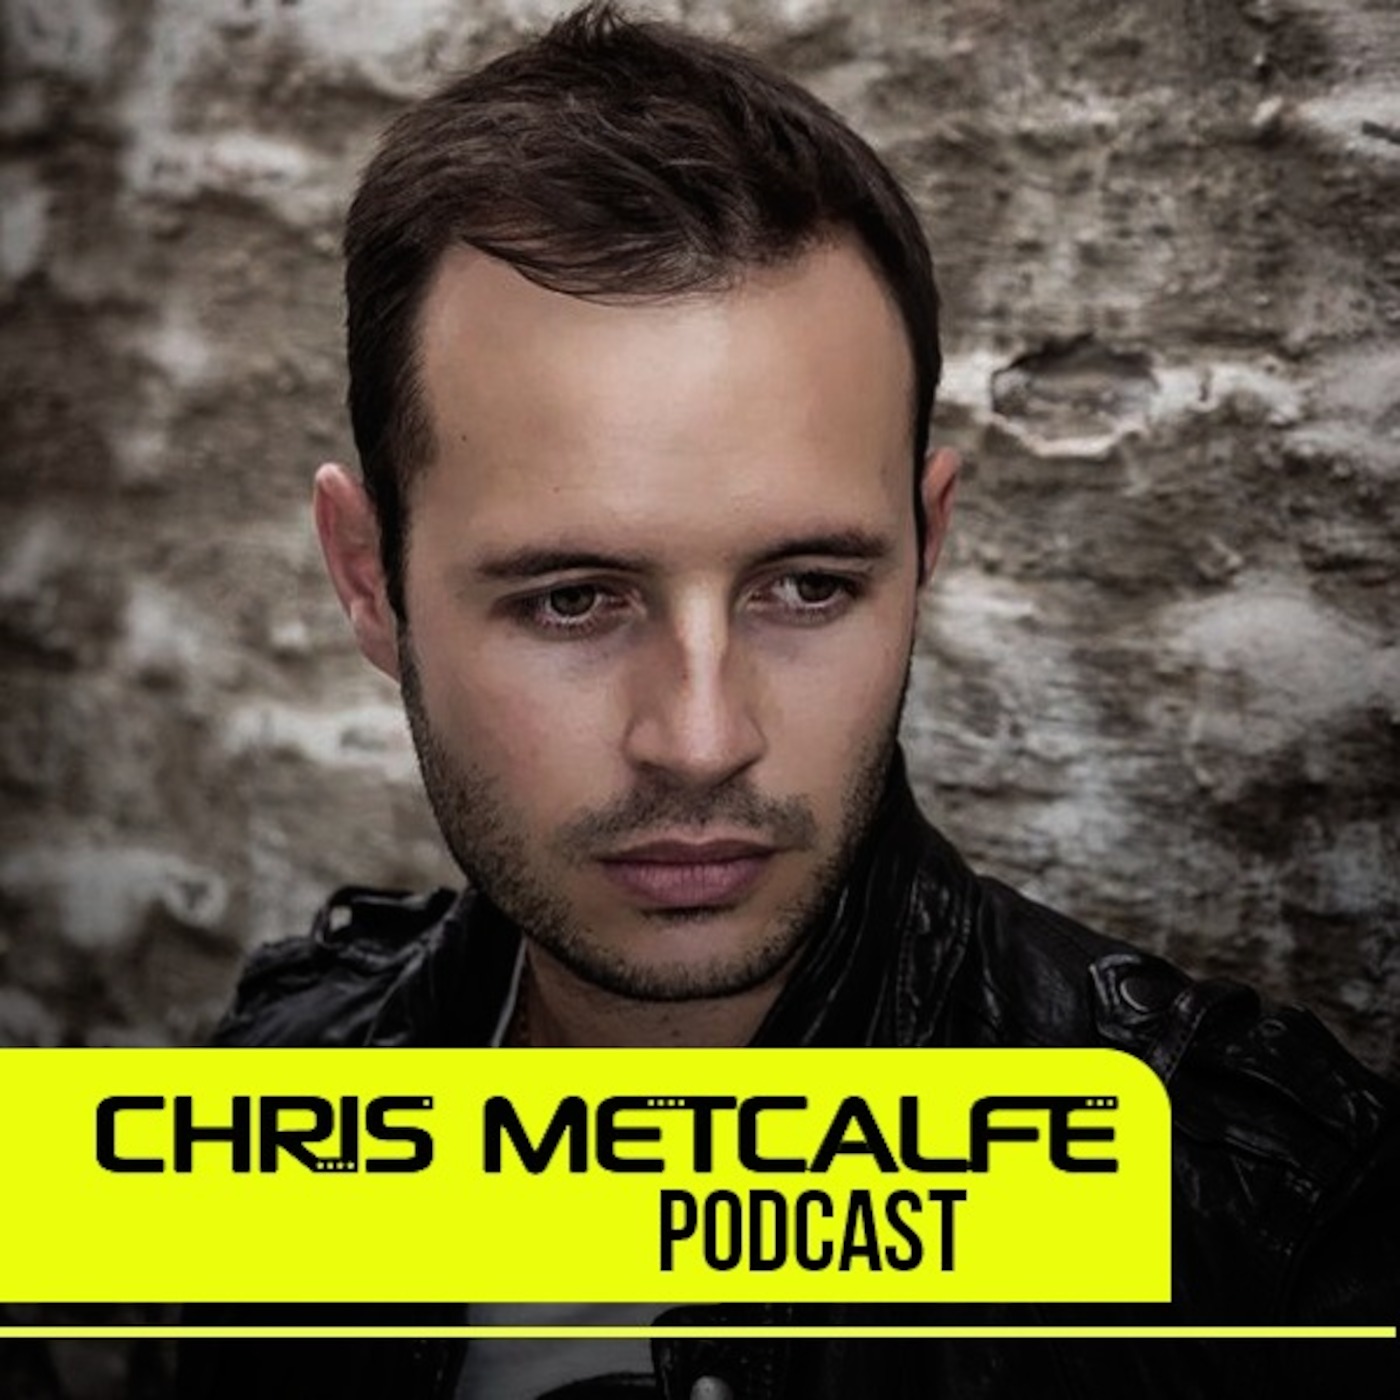 Chris Metcalfe Podcast 42 LIVE from Luminosty (Amsterdam)